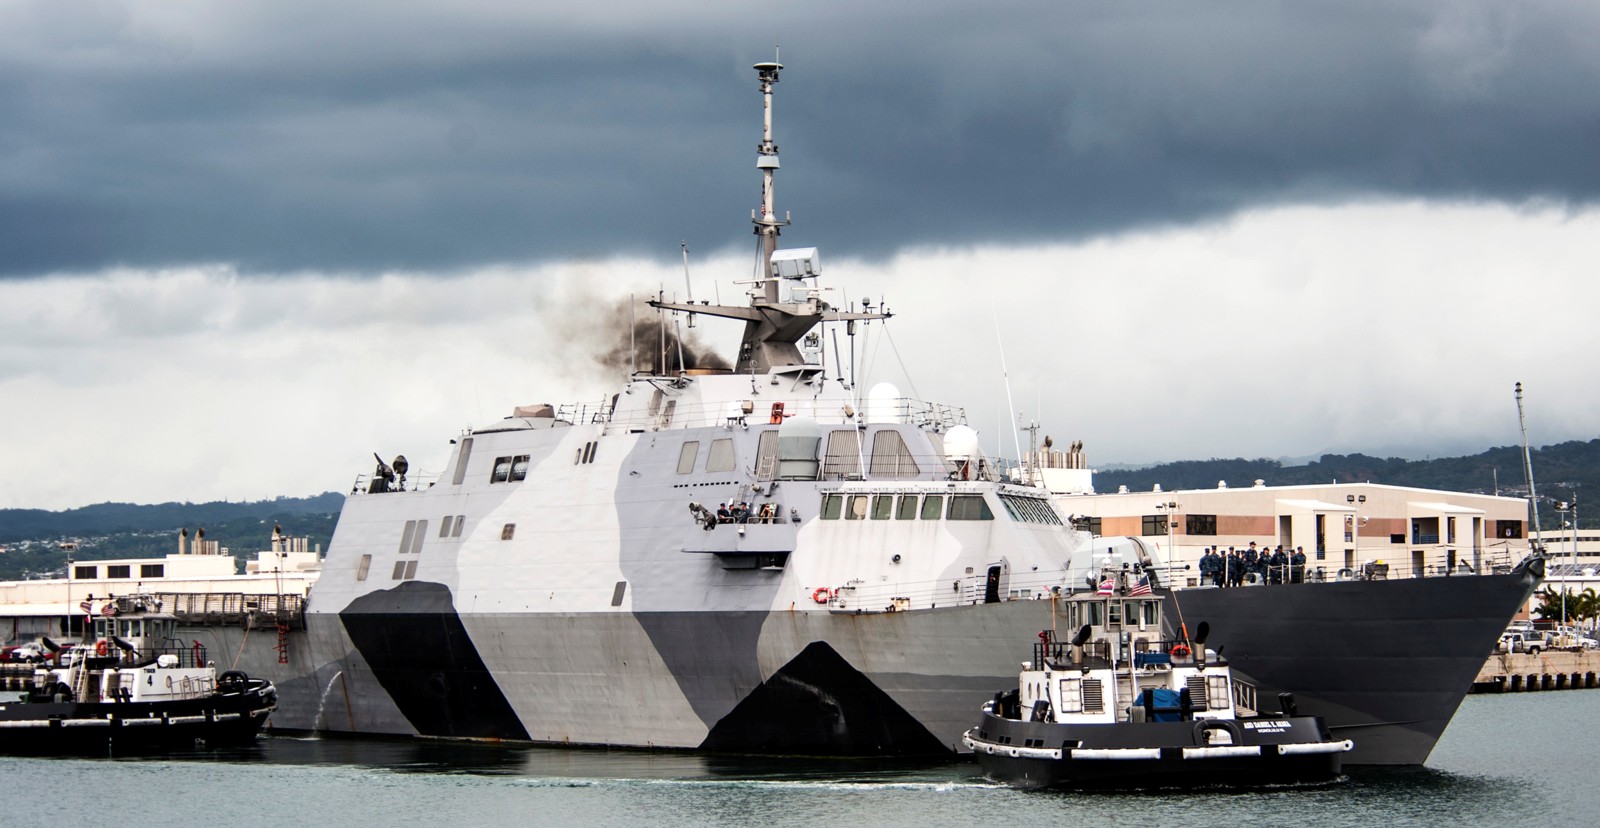 lcs-1 uss freedom class littoral combat ship us navy 18